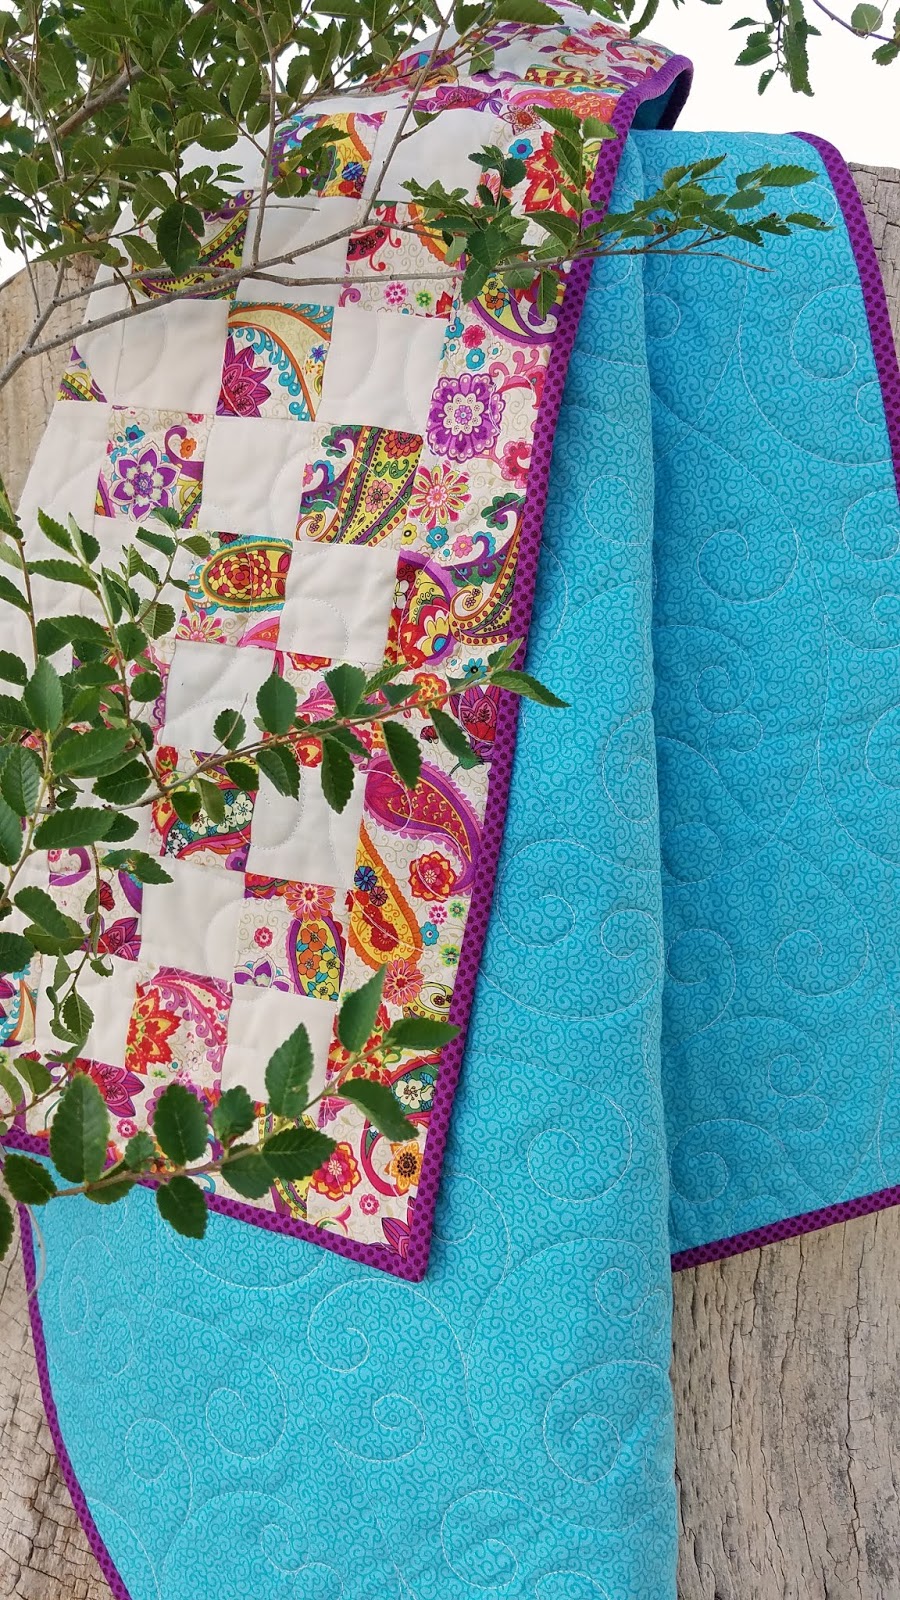 Lovin' Life At The End Of The Dirt Road: Spring Splash Baby Quilt